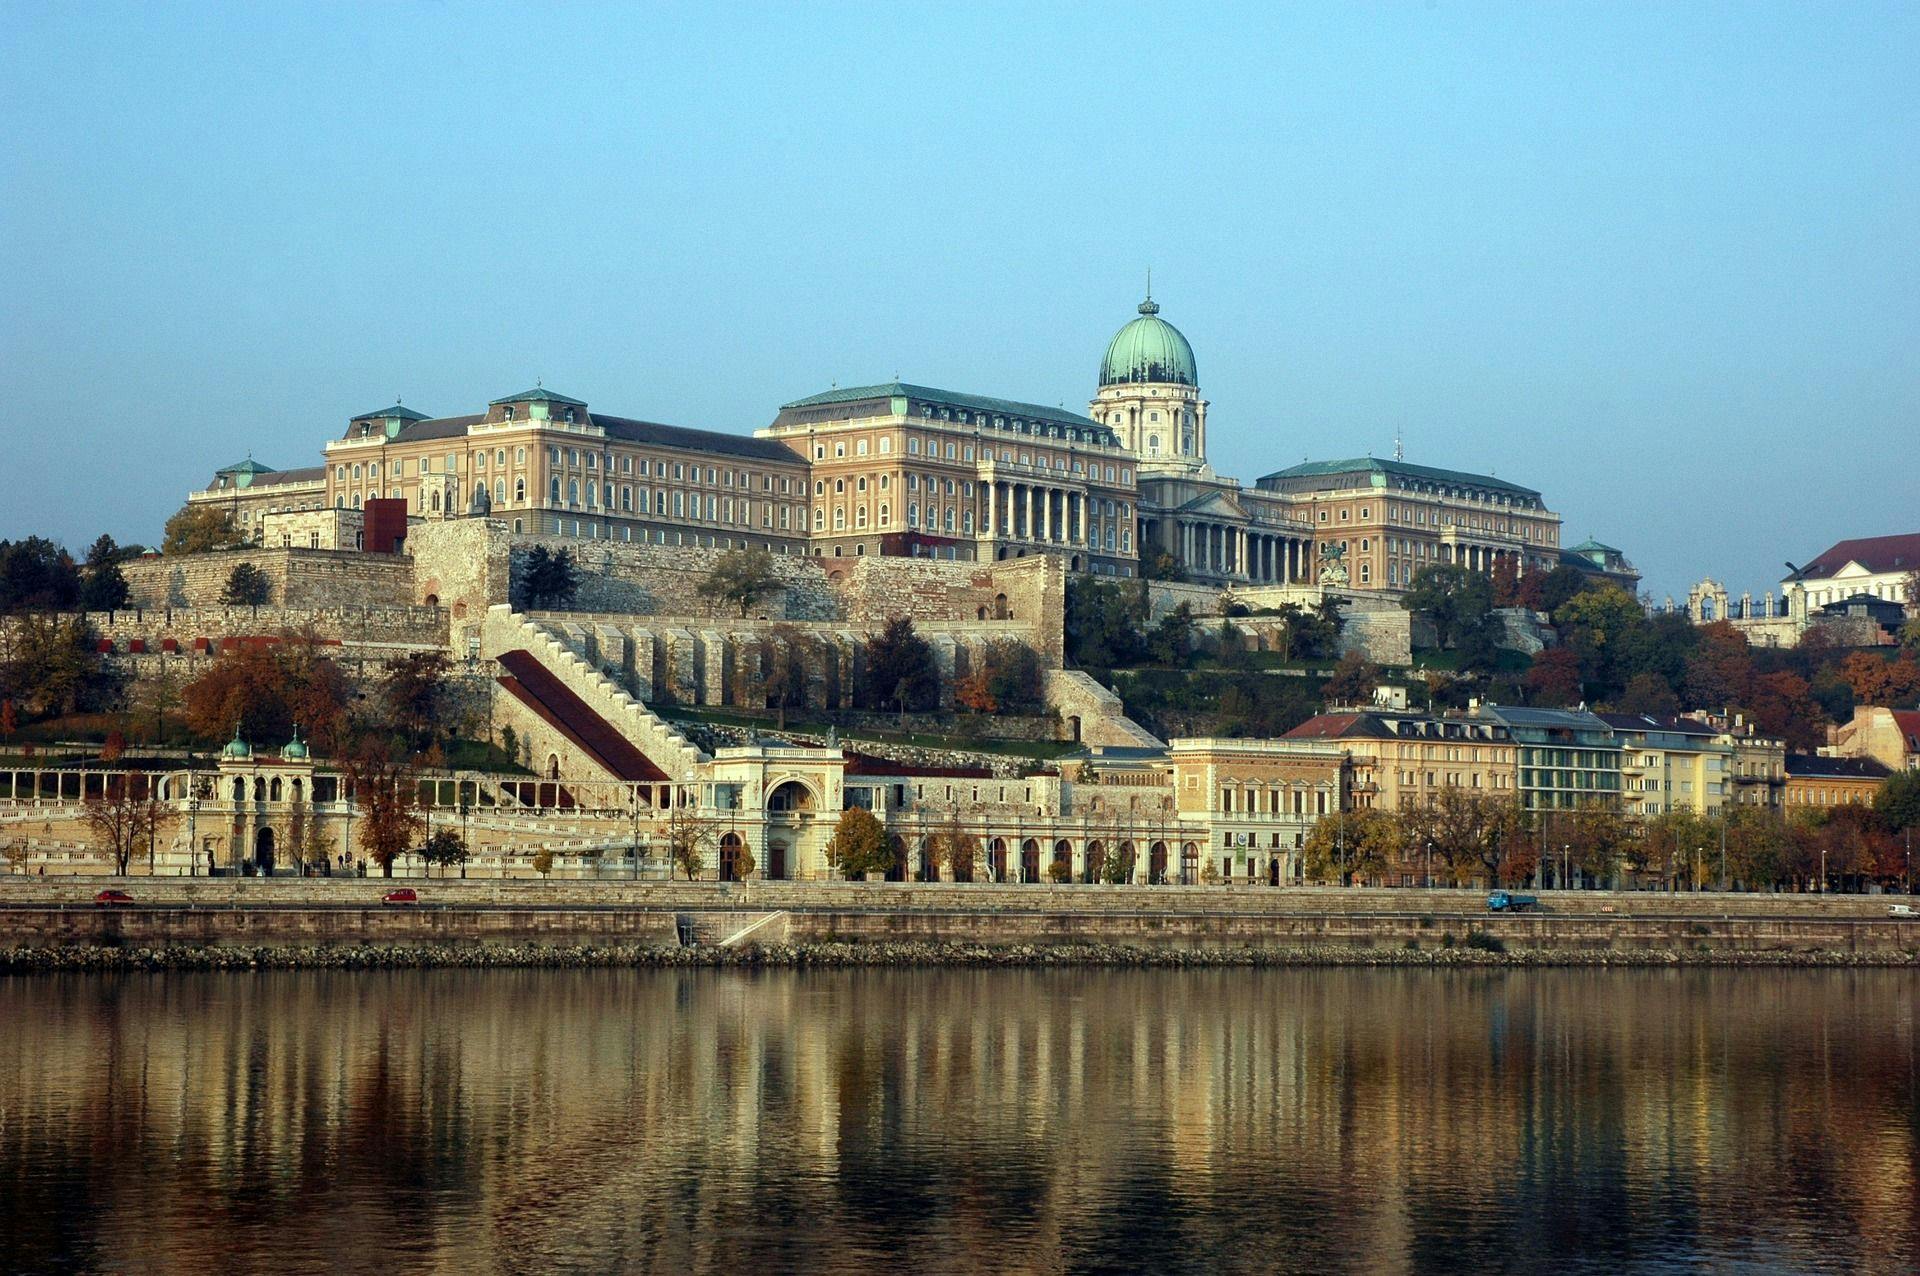 Tour of Buda Castle with a historian Musement